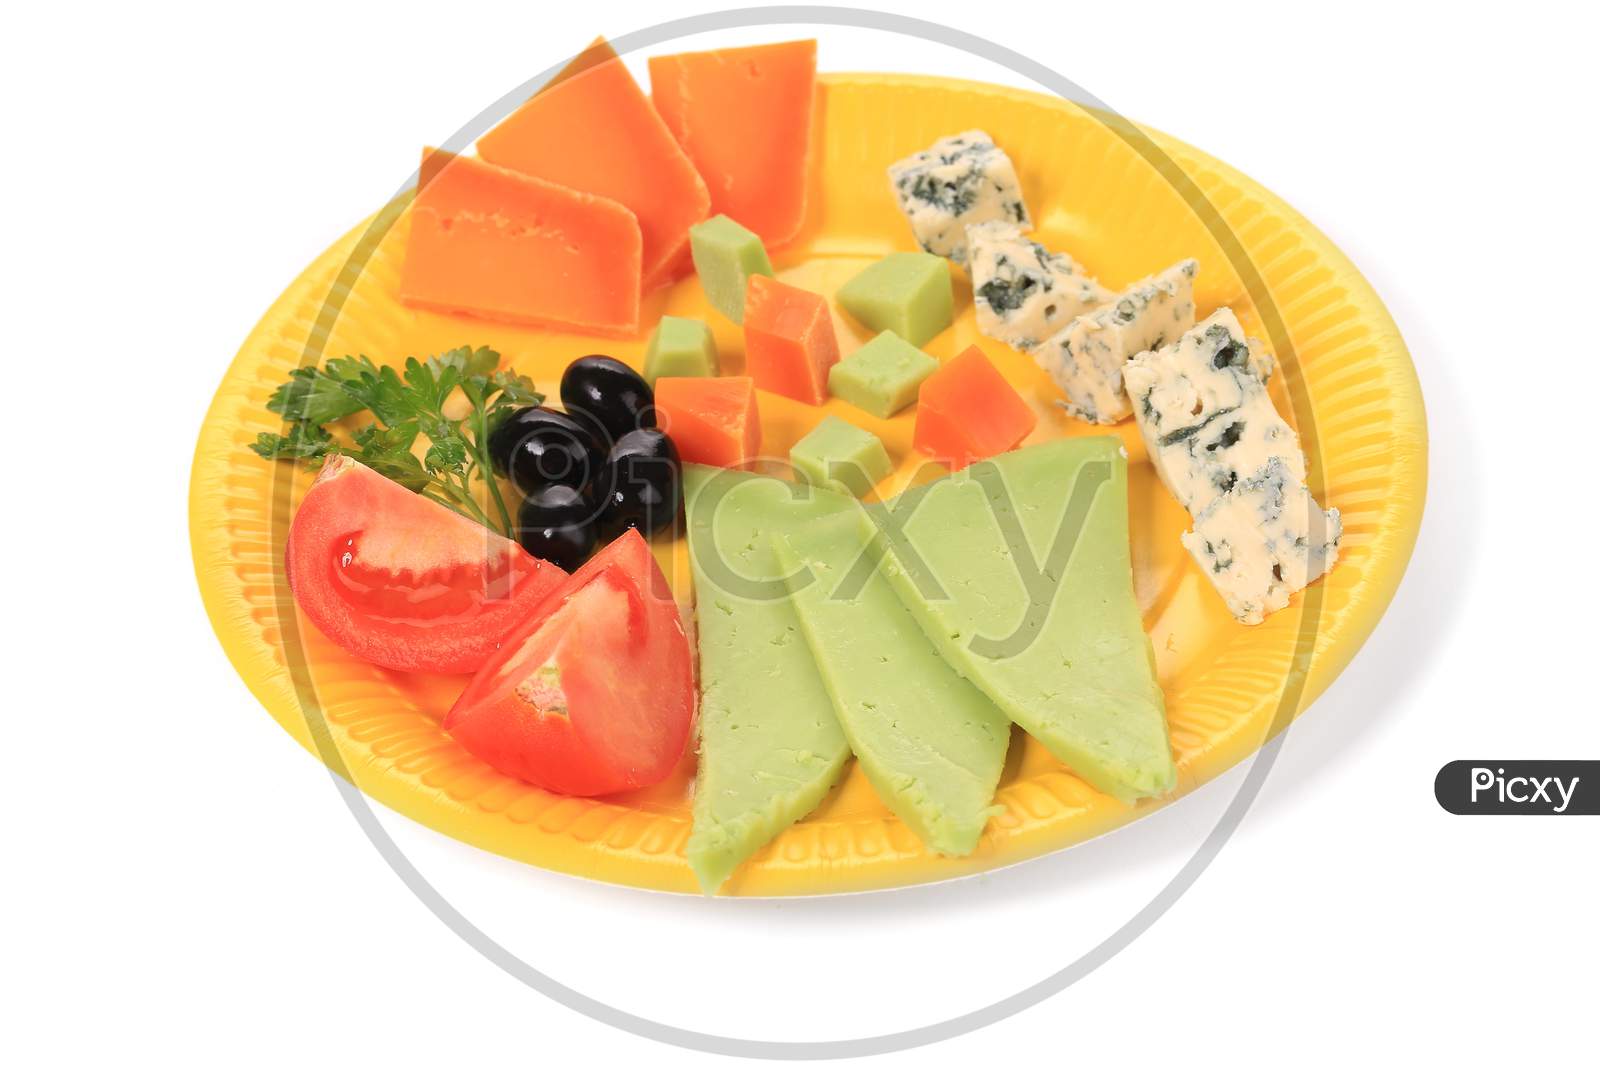 Various Cheese On Yellow Platter. Isolated On A White Background.